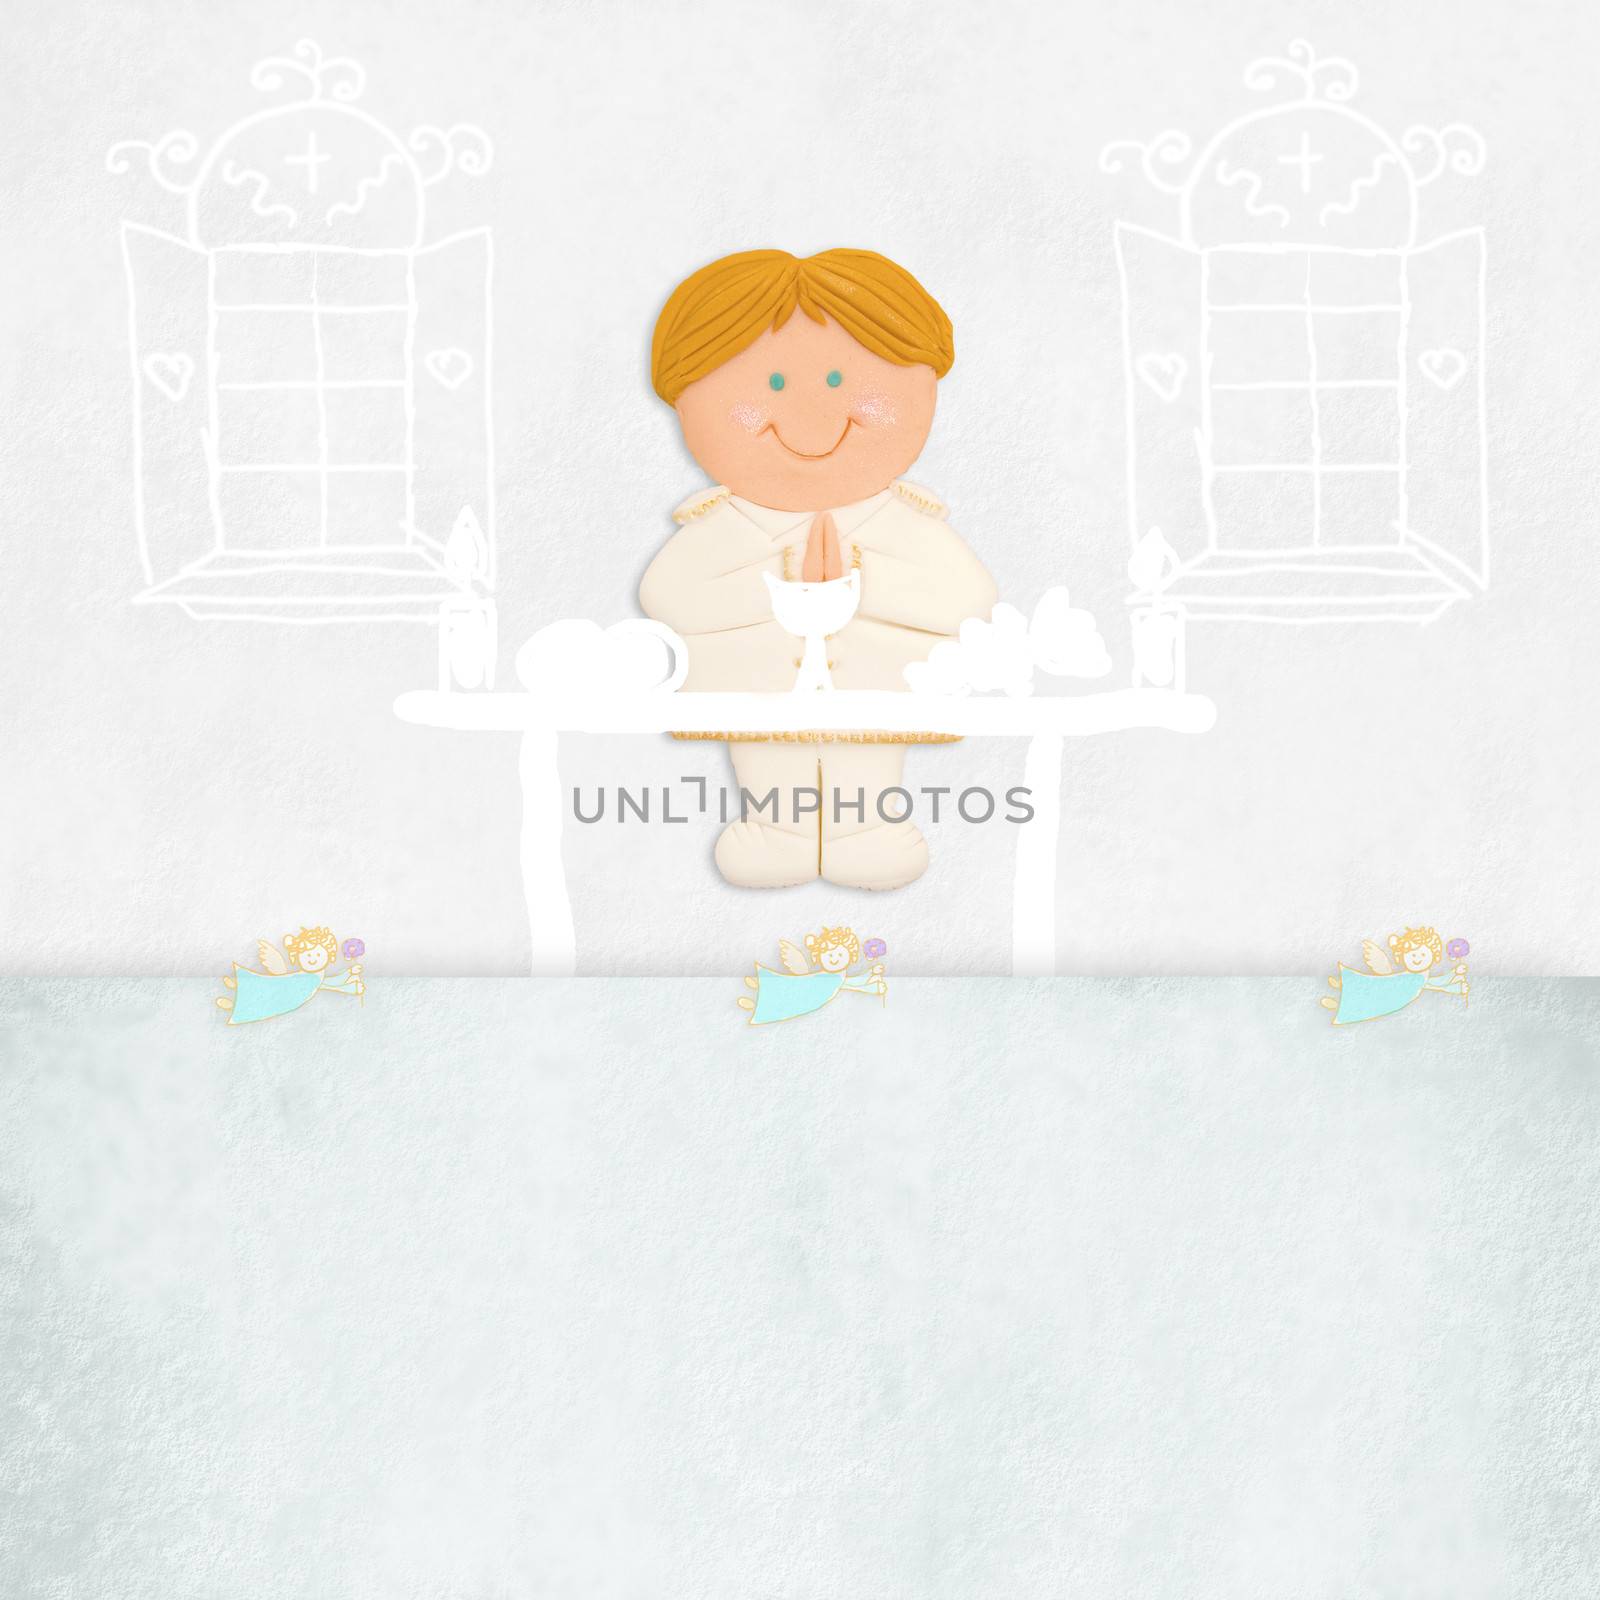 first communion invitation blond boy on the altar and space for name and place